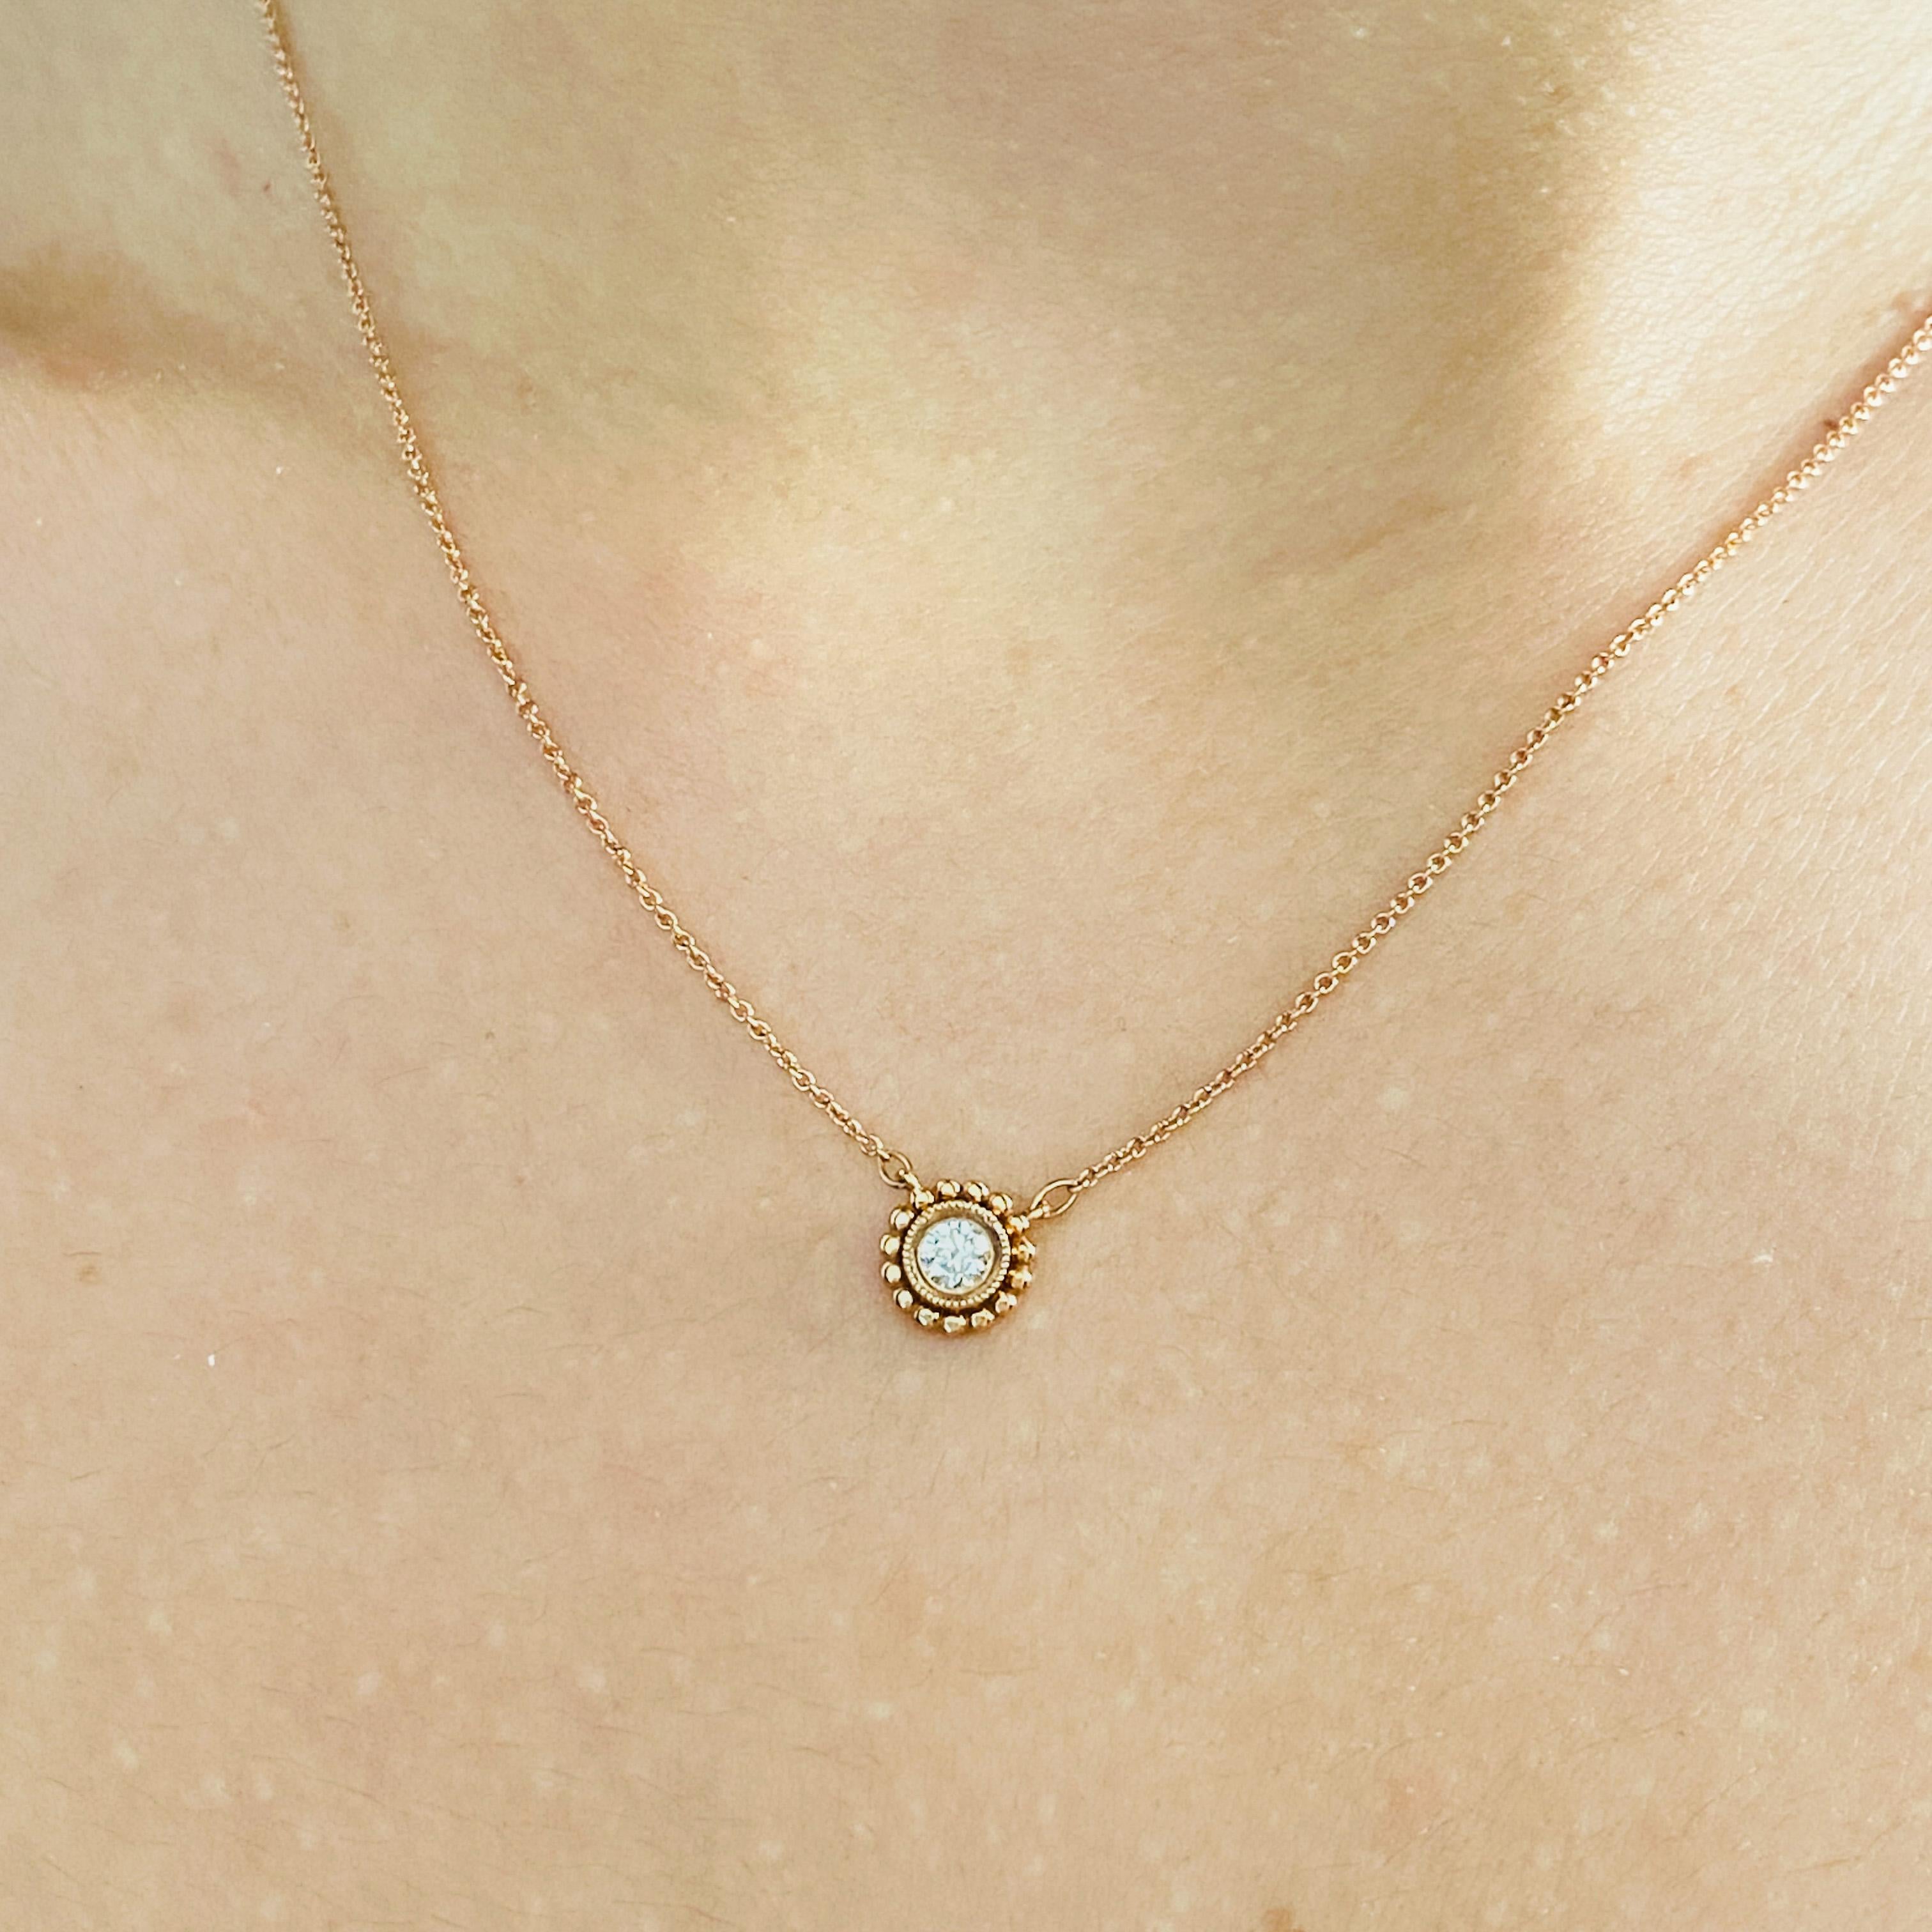 Add a dainty diamond daisy in rose gold to the neck of a loved one. This beautiful petite pendant has a sparklingly bright diamond made to flatter your favorite person in rose gold! The flower-like frame is accented by a fine milgrain texture along